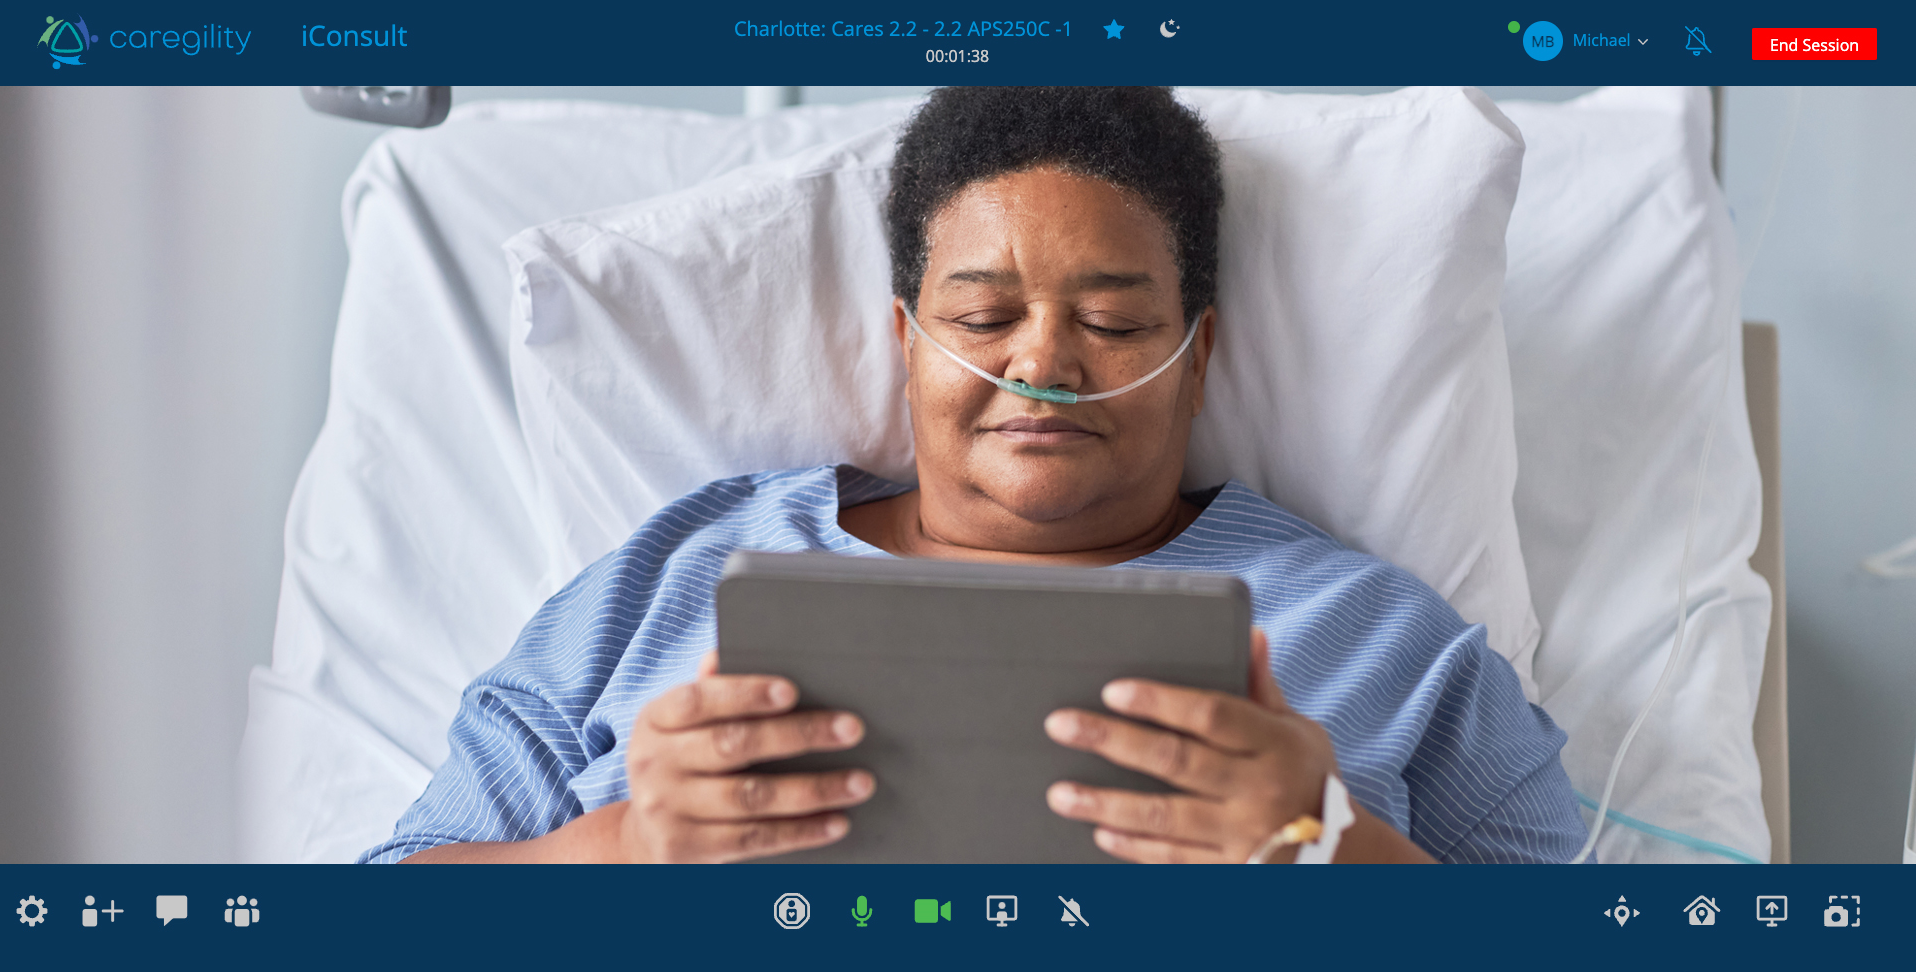 Caregility iConsult Telehealth Application for Virtual Visits